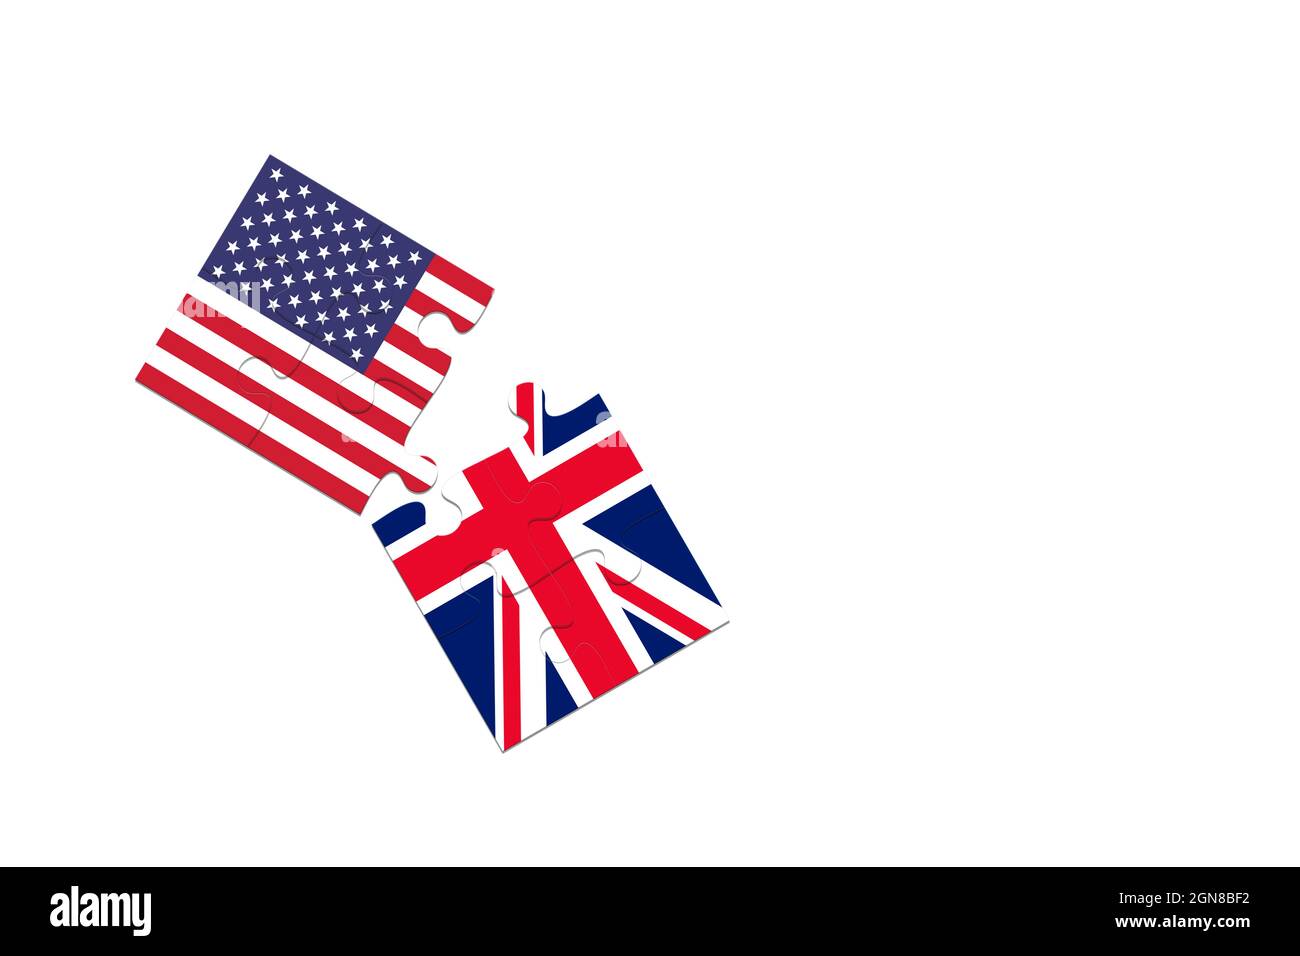 Post Brexit December 31 2020 the negotiation and agreement of a trade deal between the United States and te United Kingdom Stock Photo